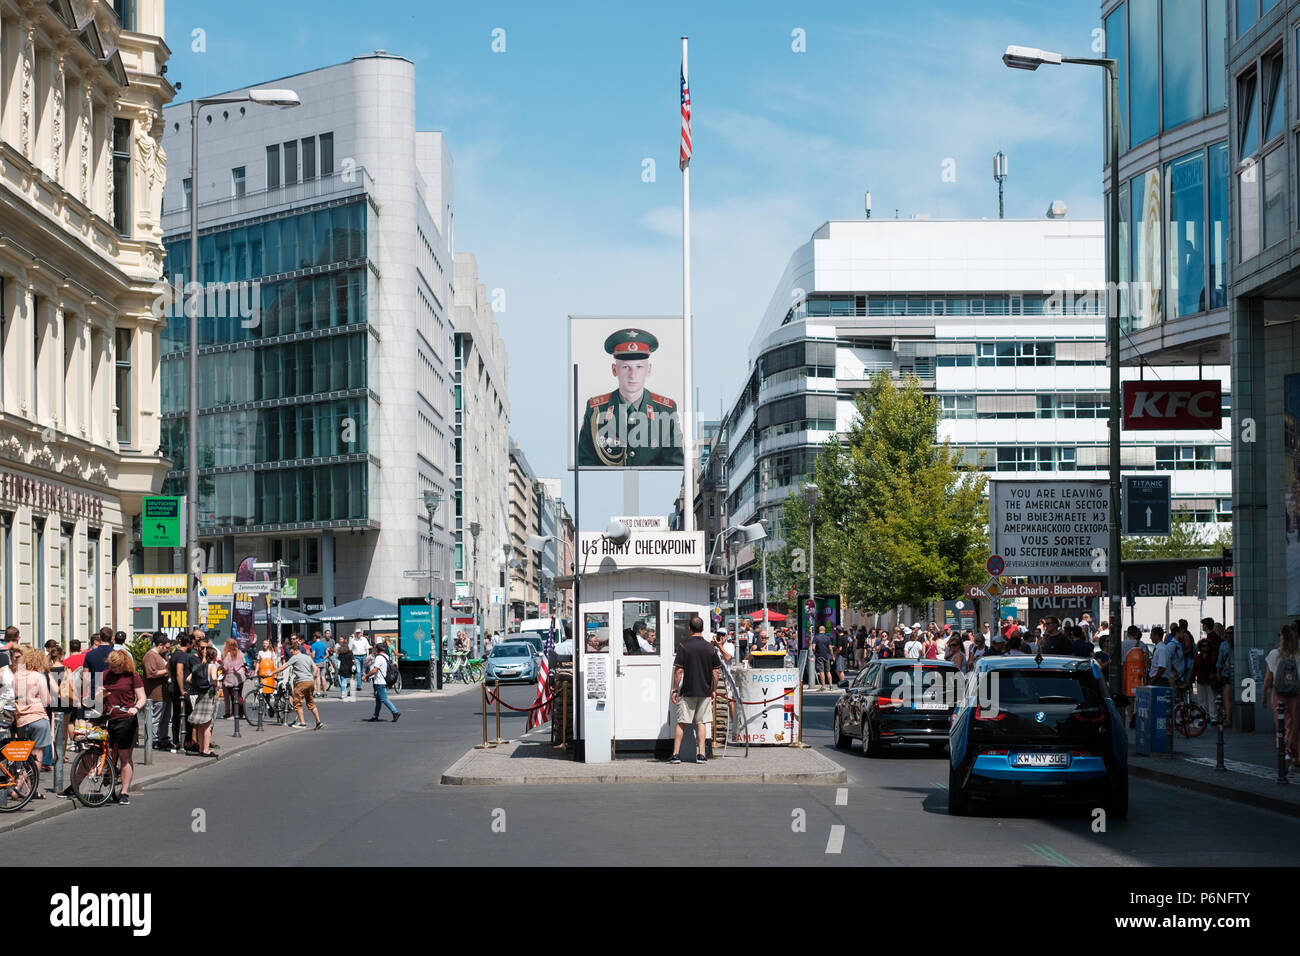 Berlin, Germany - june 2018: The Checkpoint Charlie, a former border checkpoint  in Berlin, Germany Stock Photo